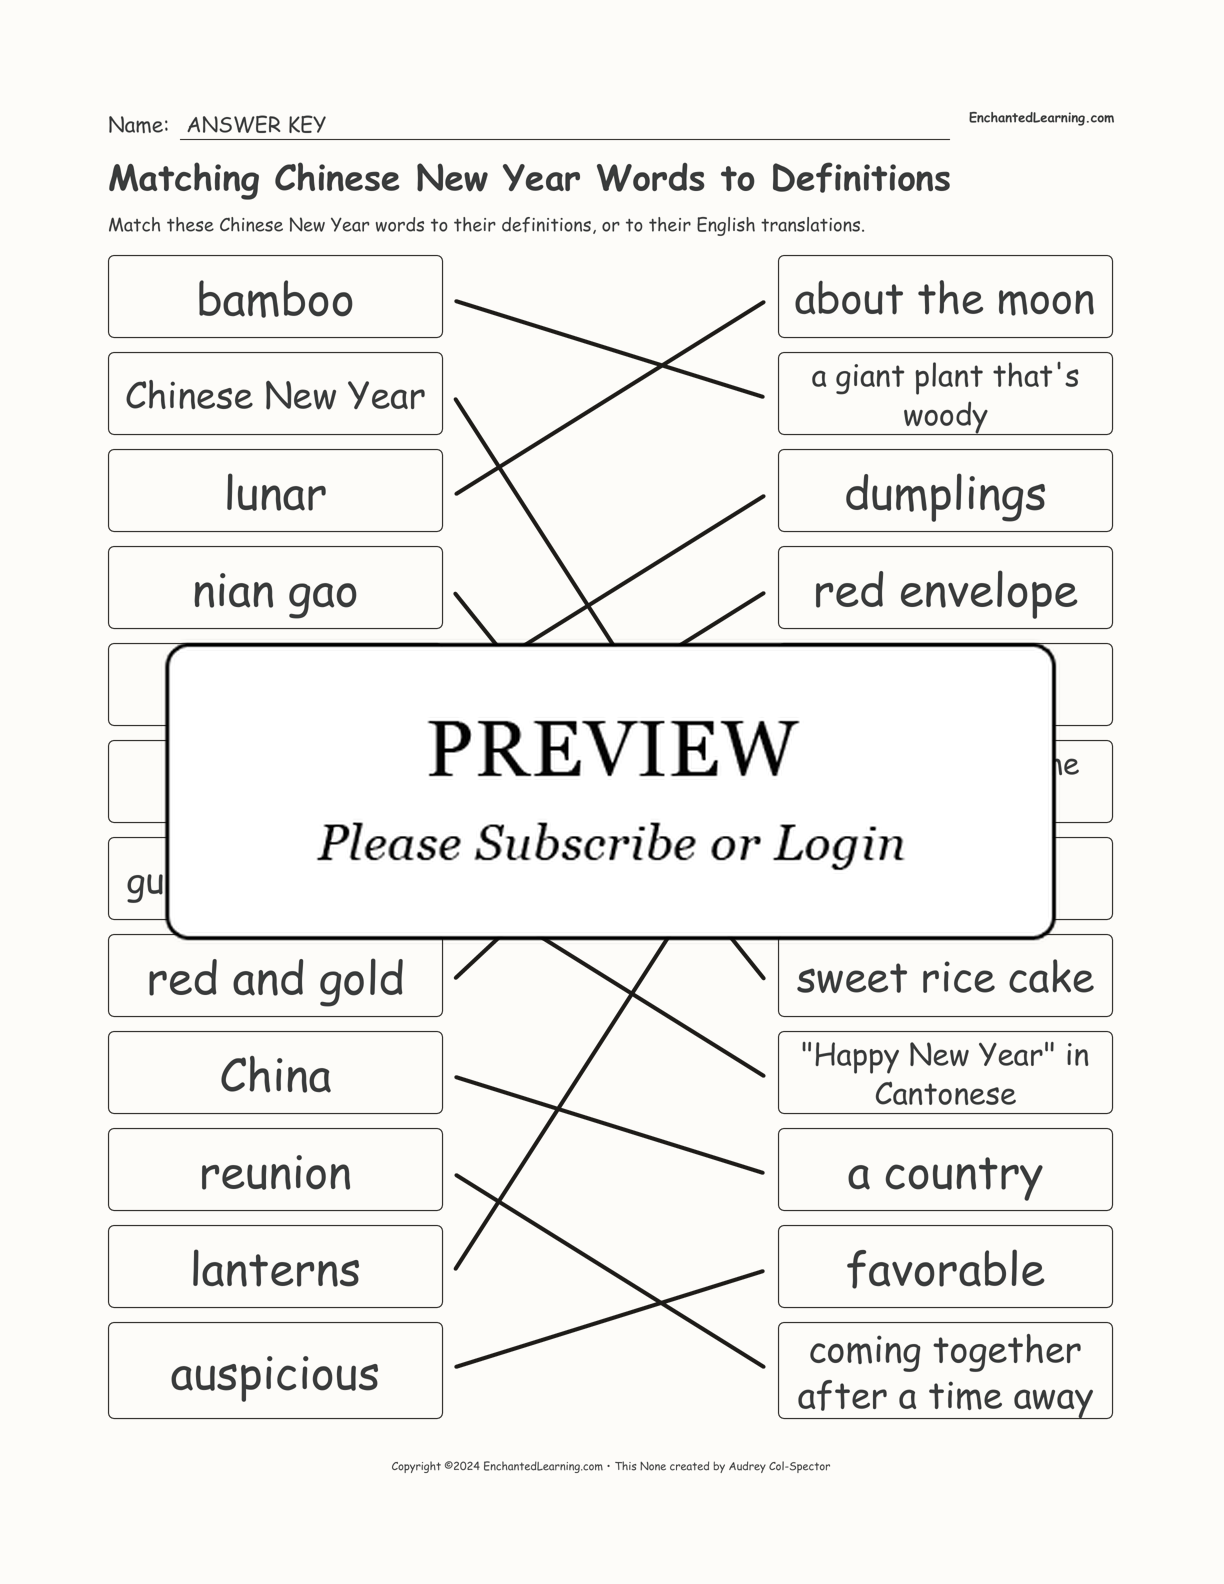 Matching Chinese New Year Words to Definitions interactive worksheet page 2